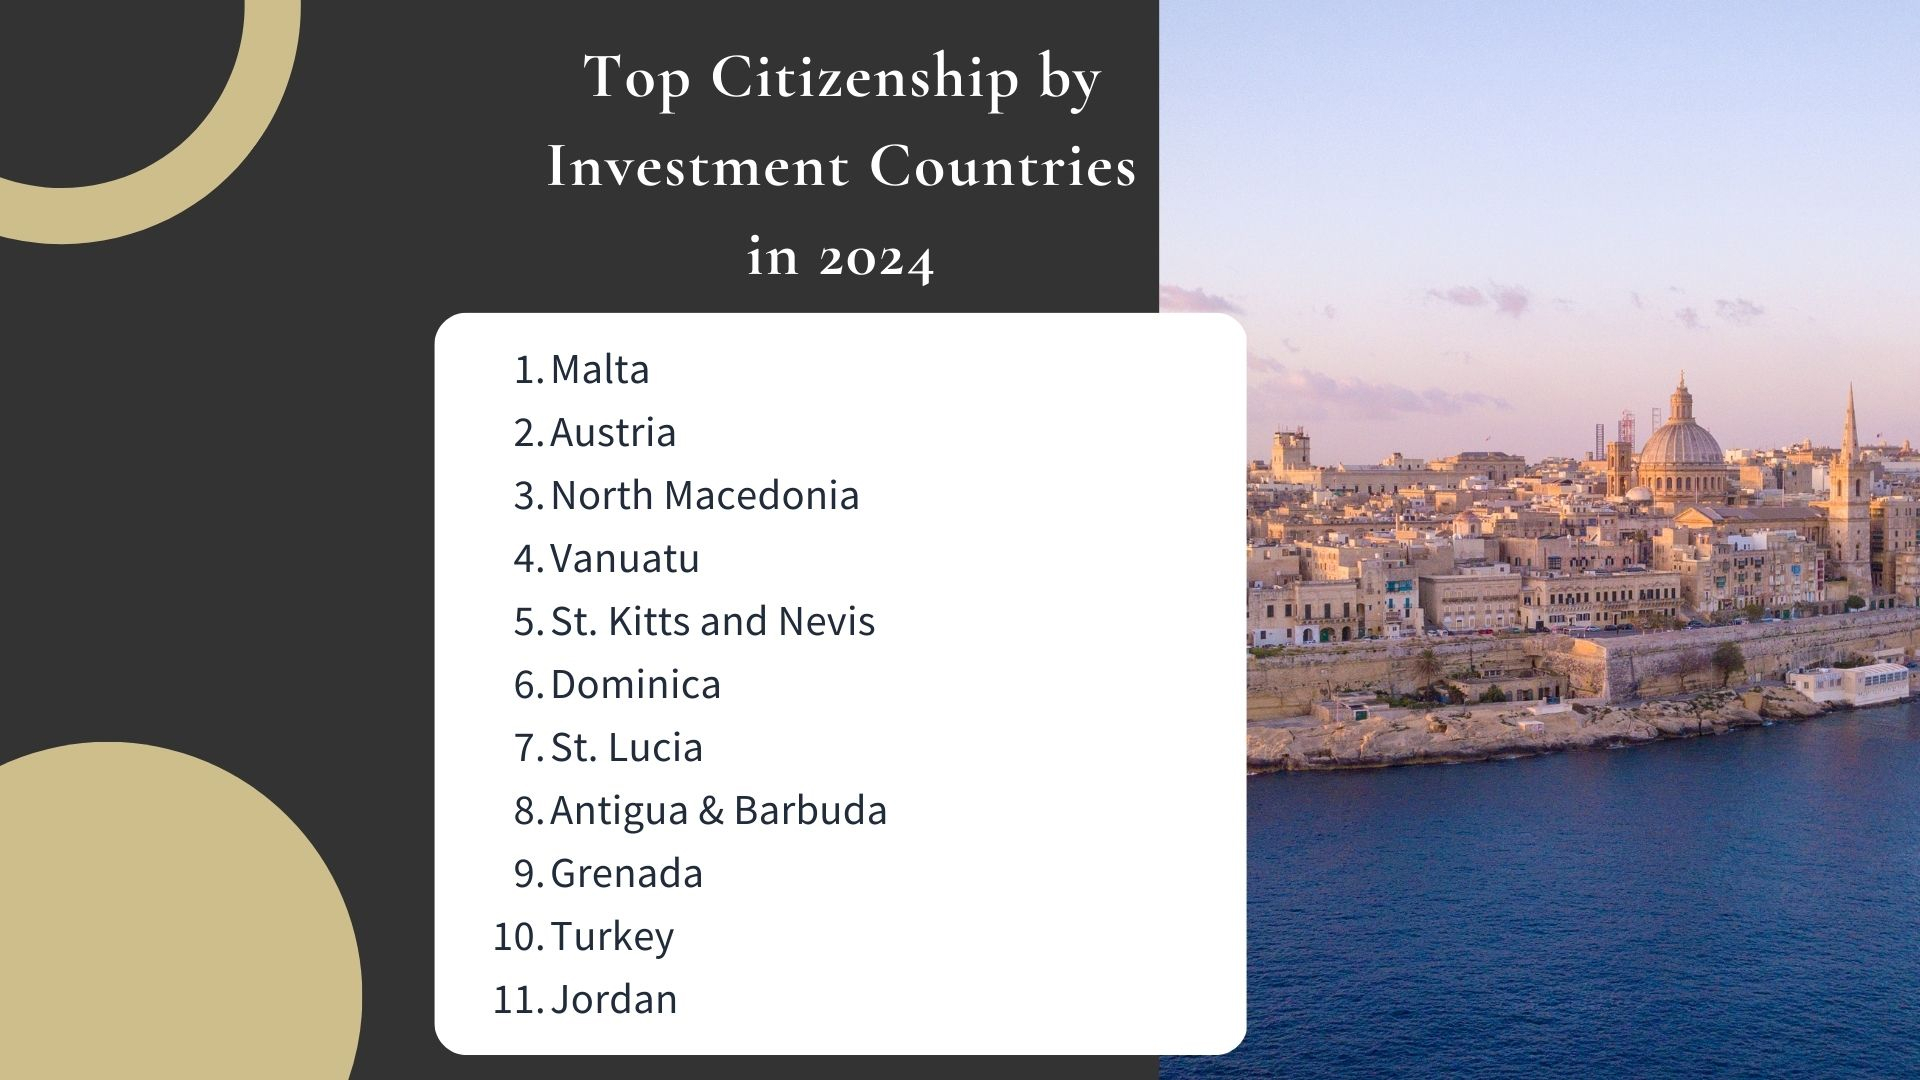 Top Citizenship by Investment Countries in 2024